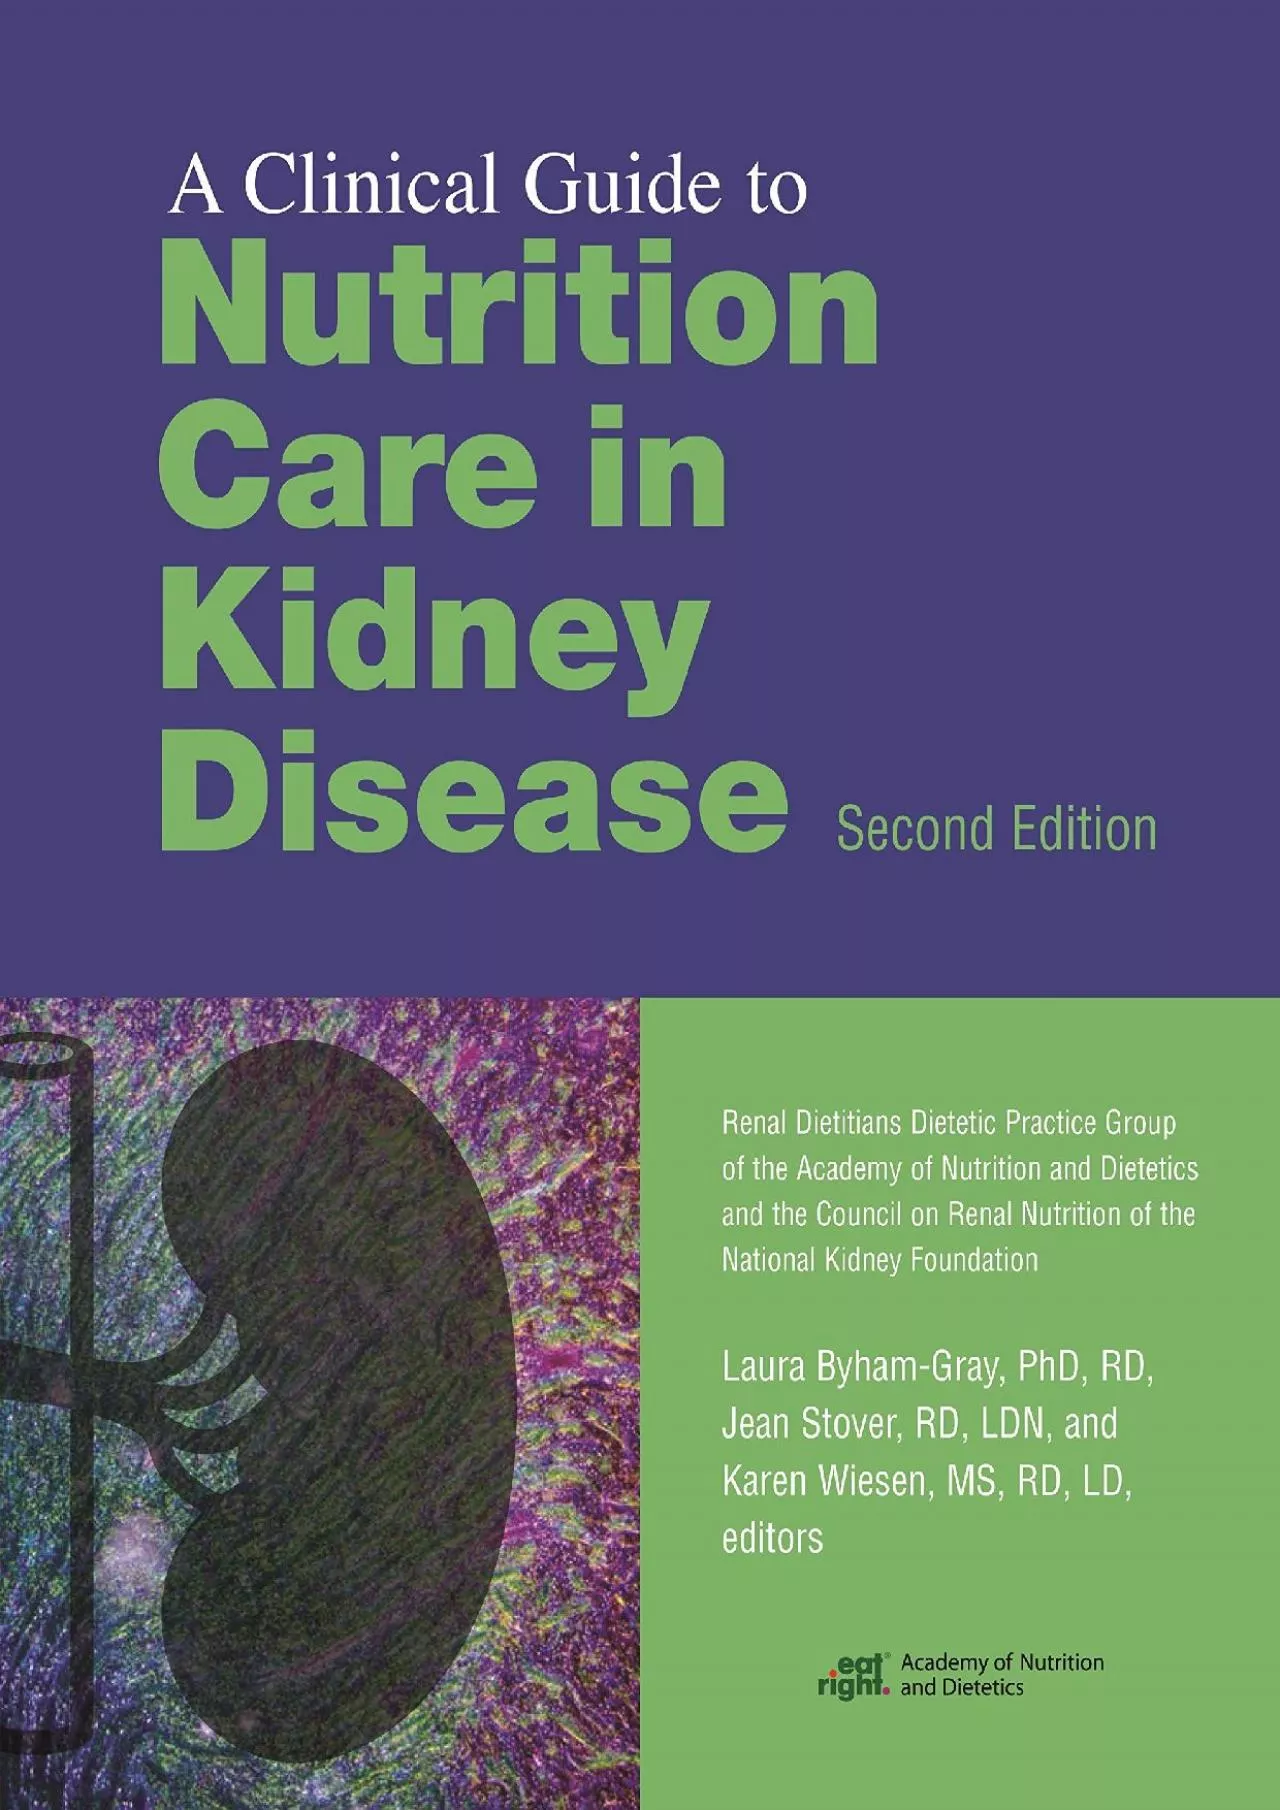 (BOOK)-Clinical Guide to Nutrition Care in Kidney Disease, Second Edition